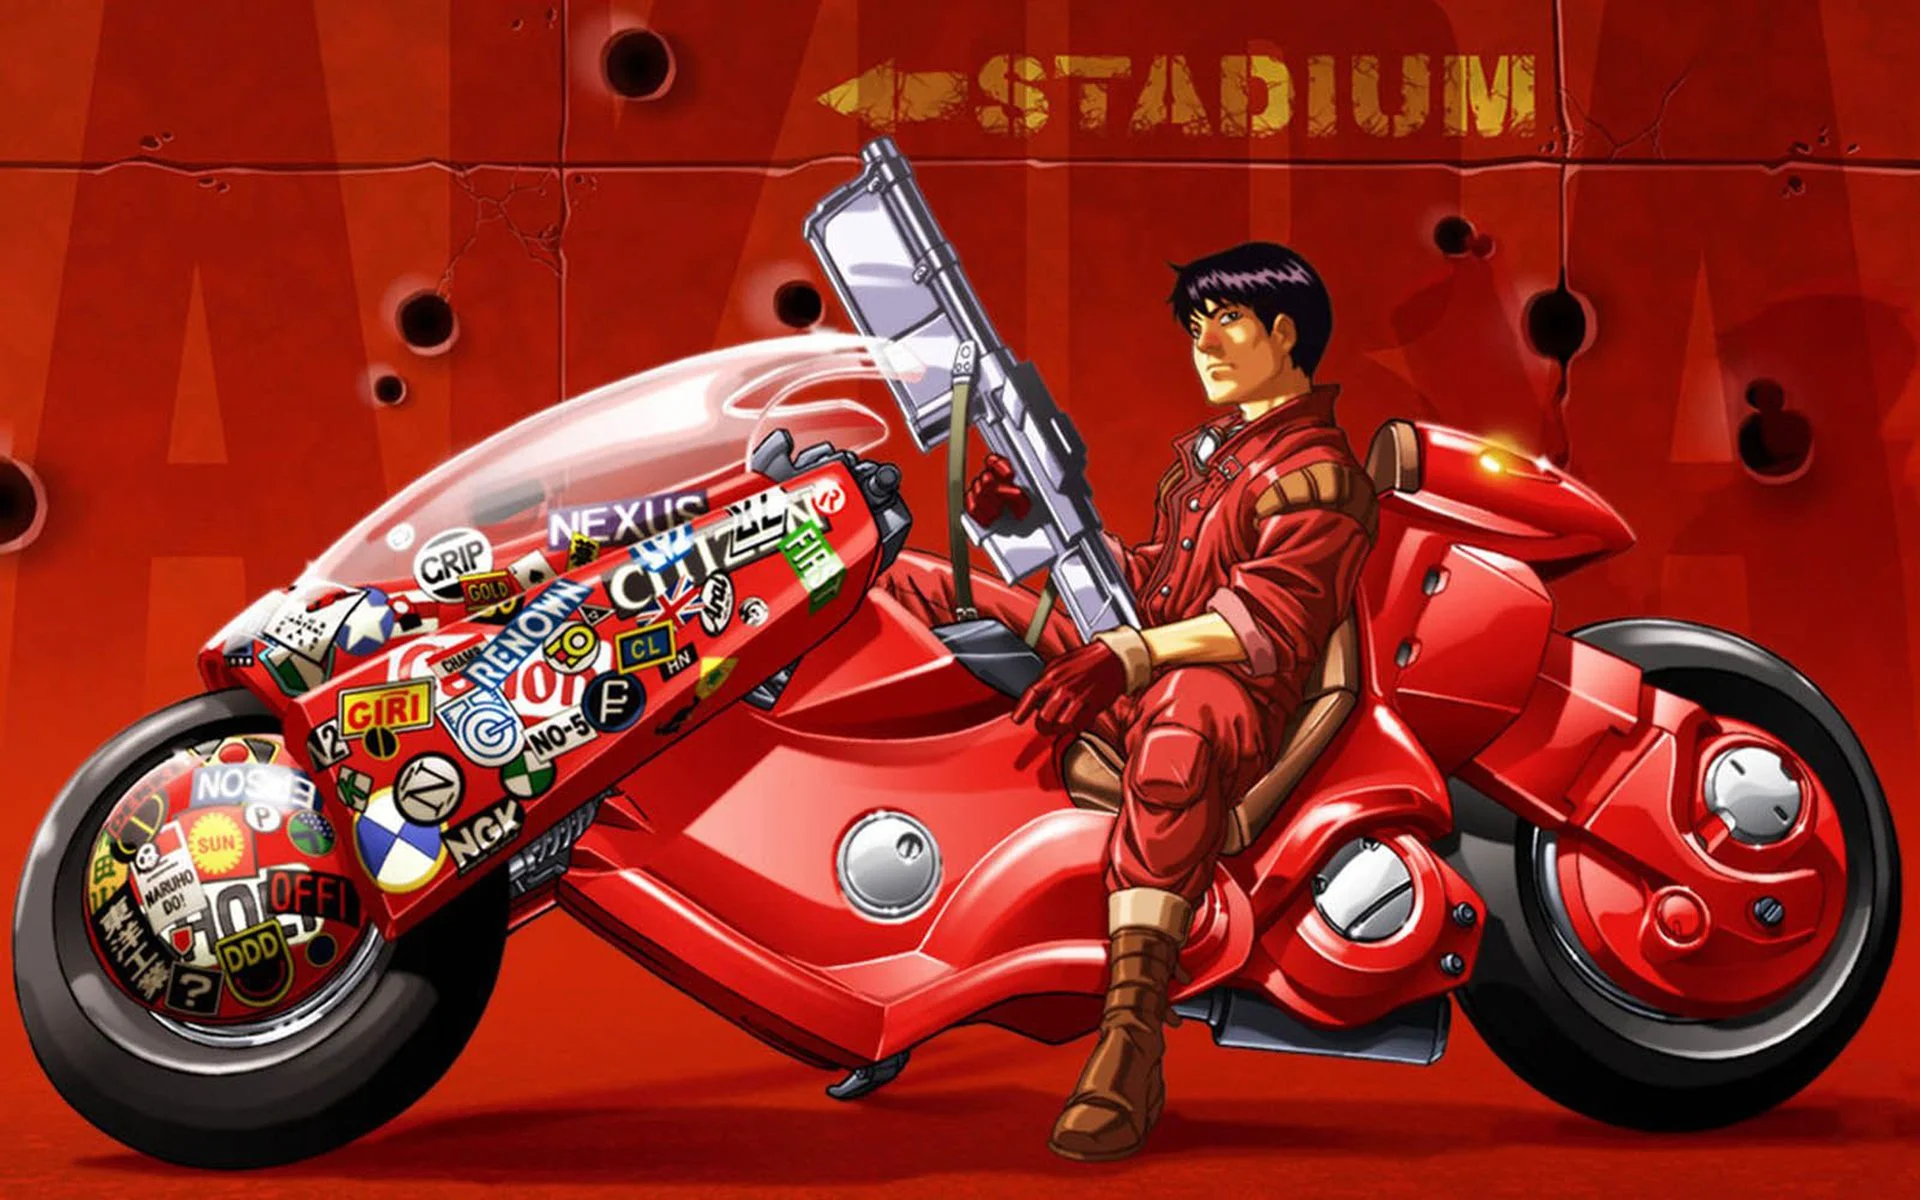 Enthusiasts have created a real working motorcycle from the famous anime "Akira"